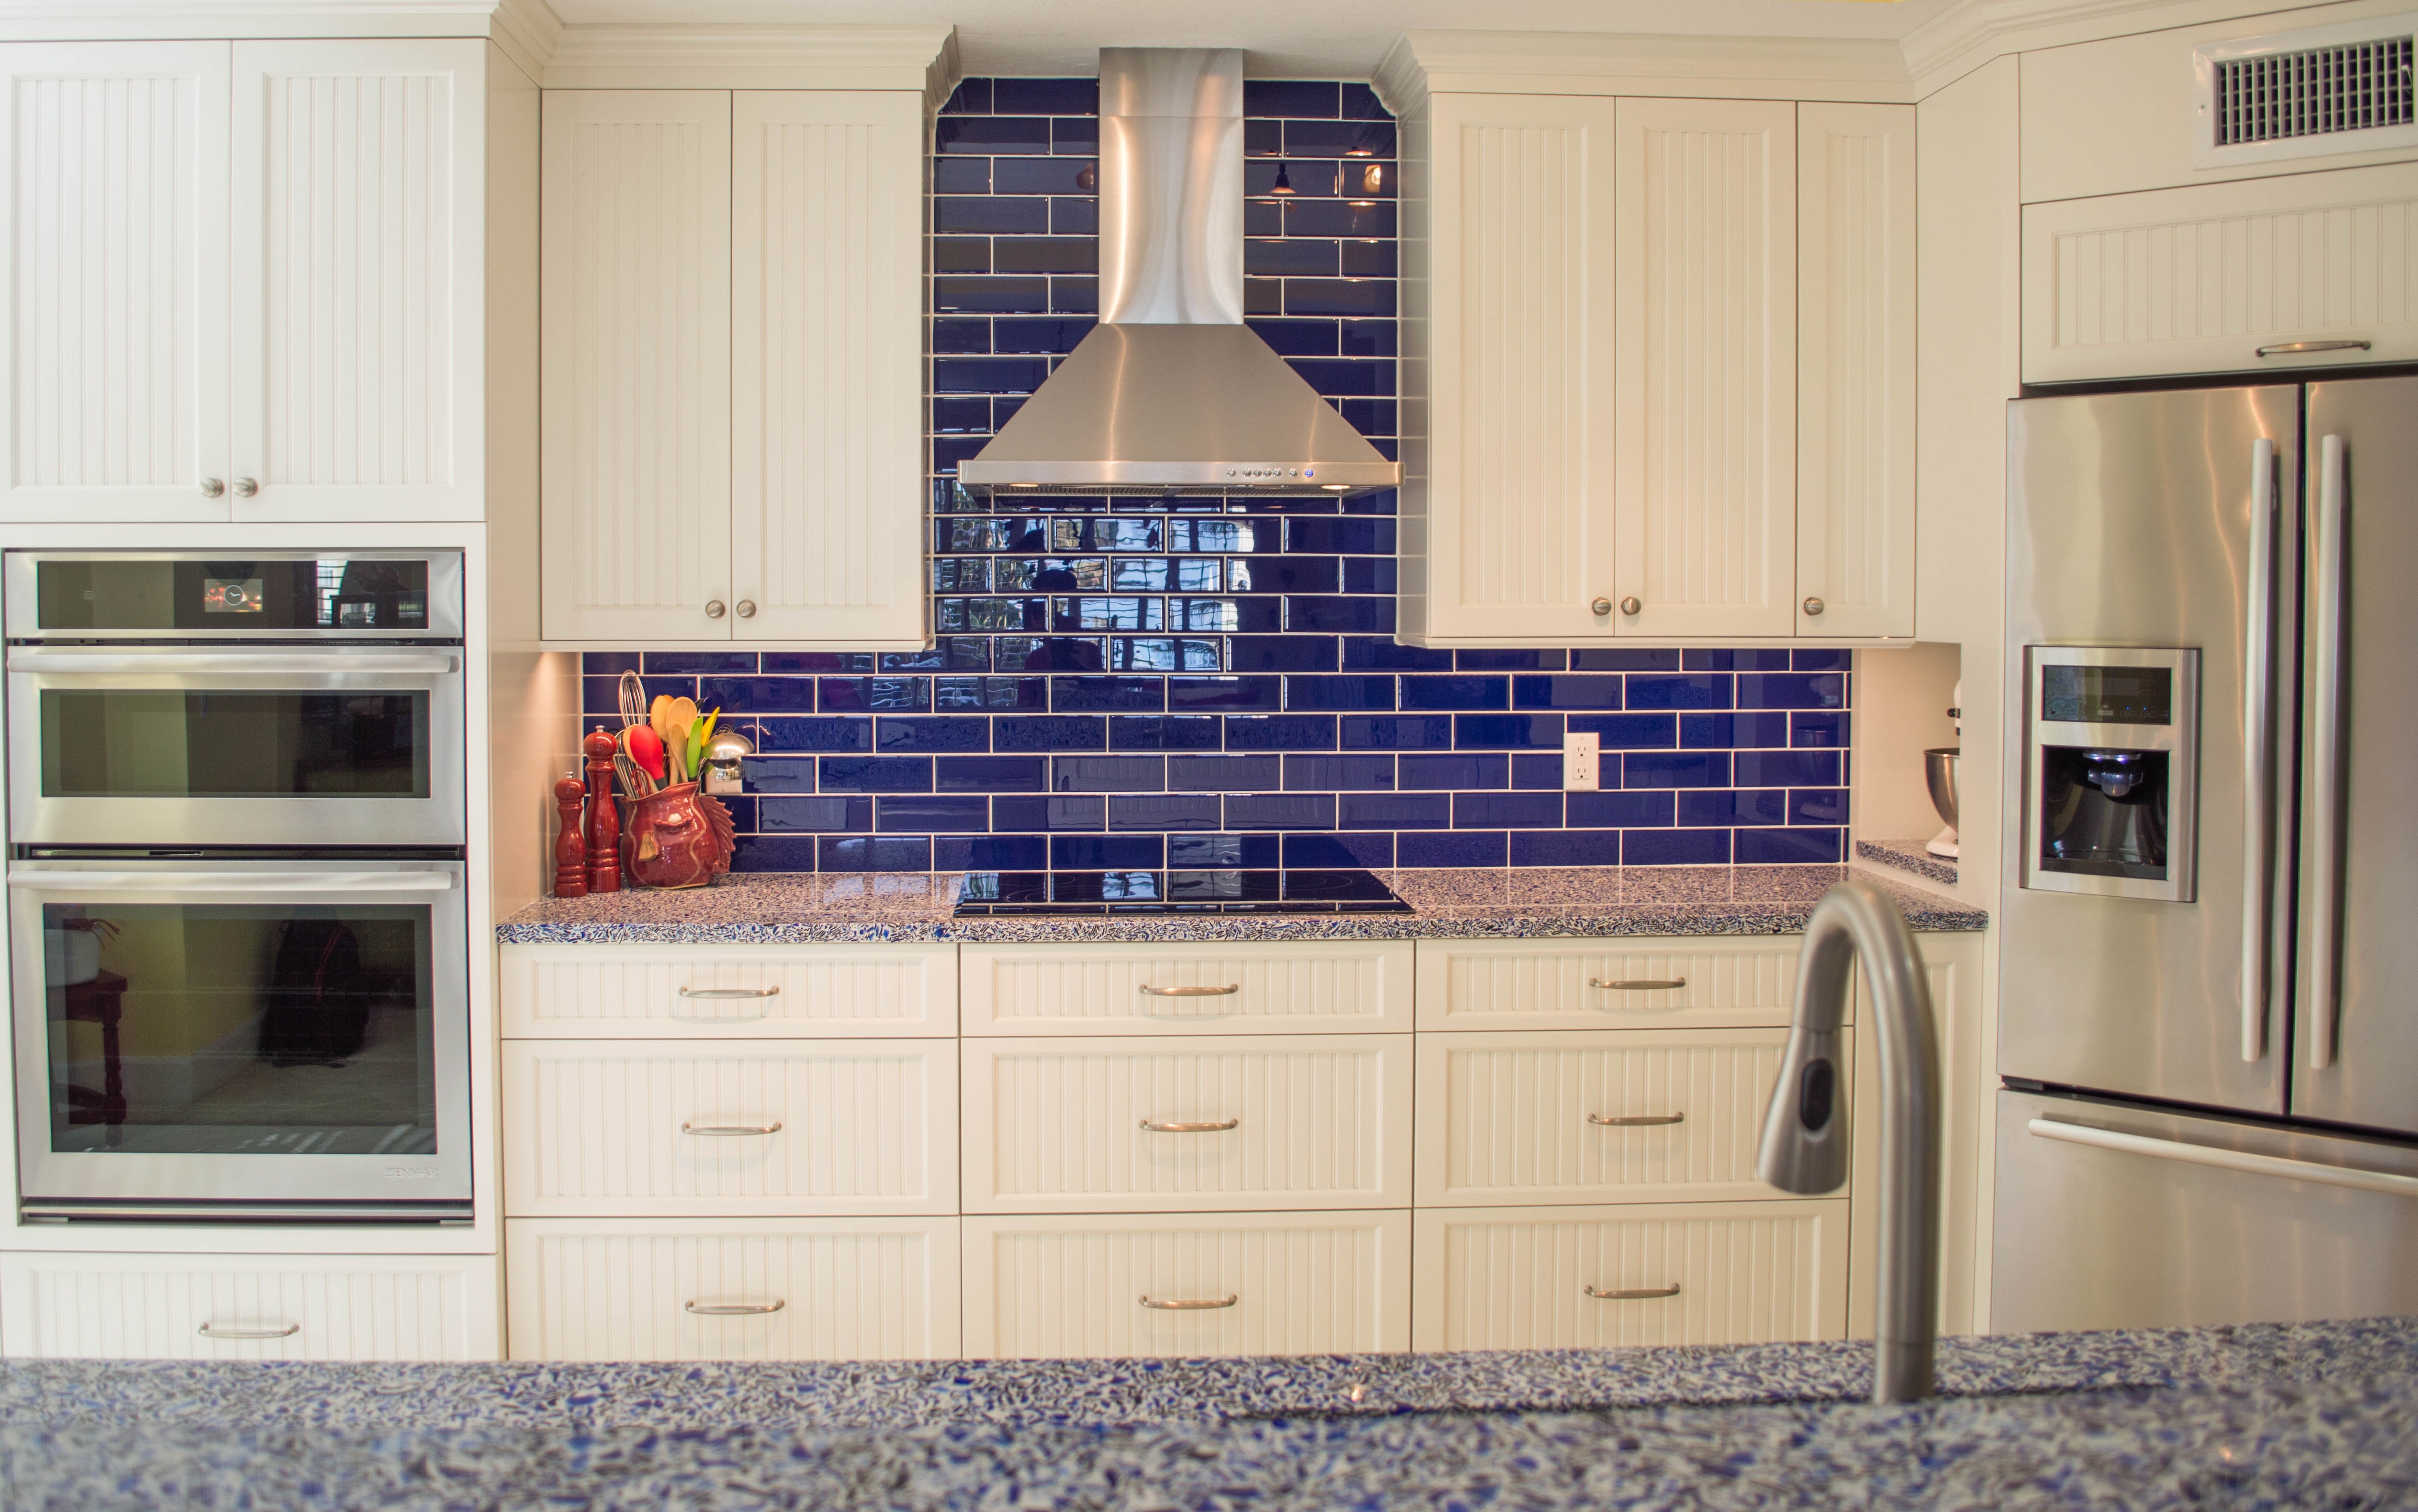 1-waterview kitchens featuring crystal cabinets and vetrazzo recycled glass-646673-edited